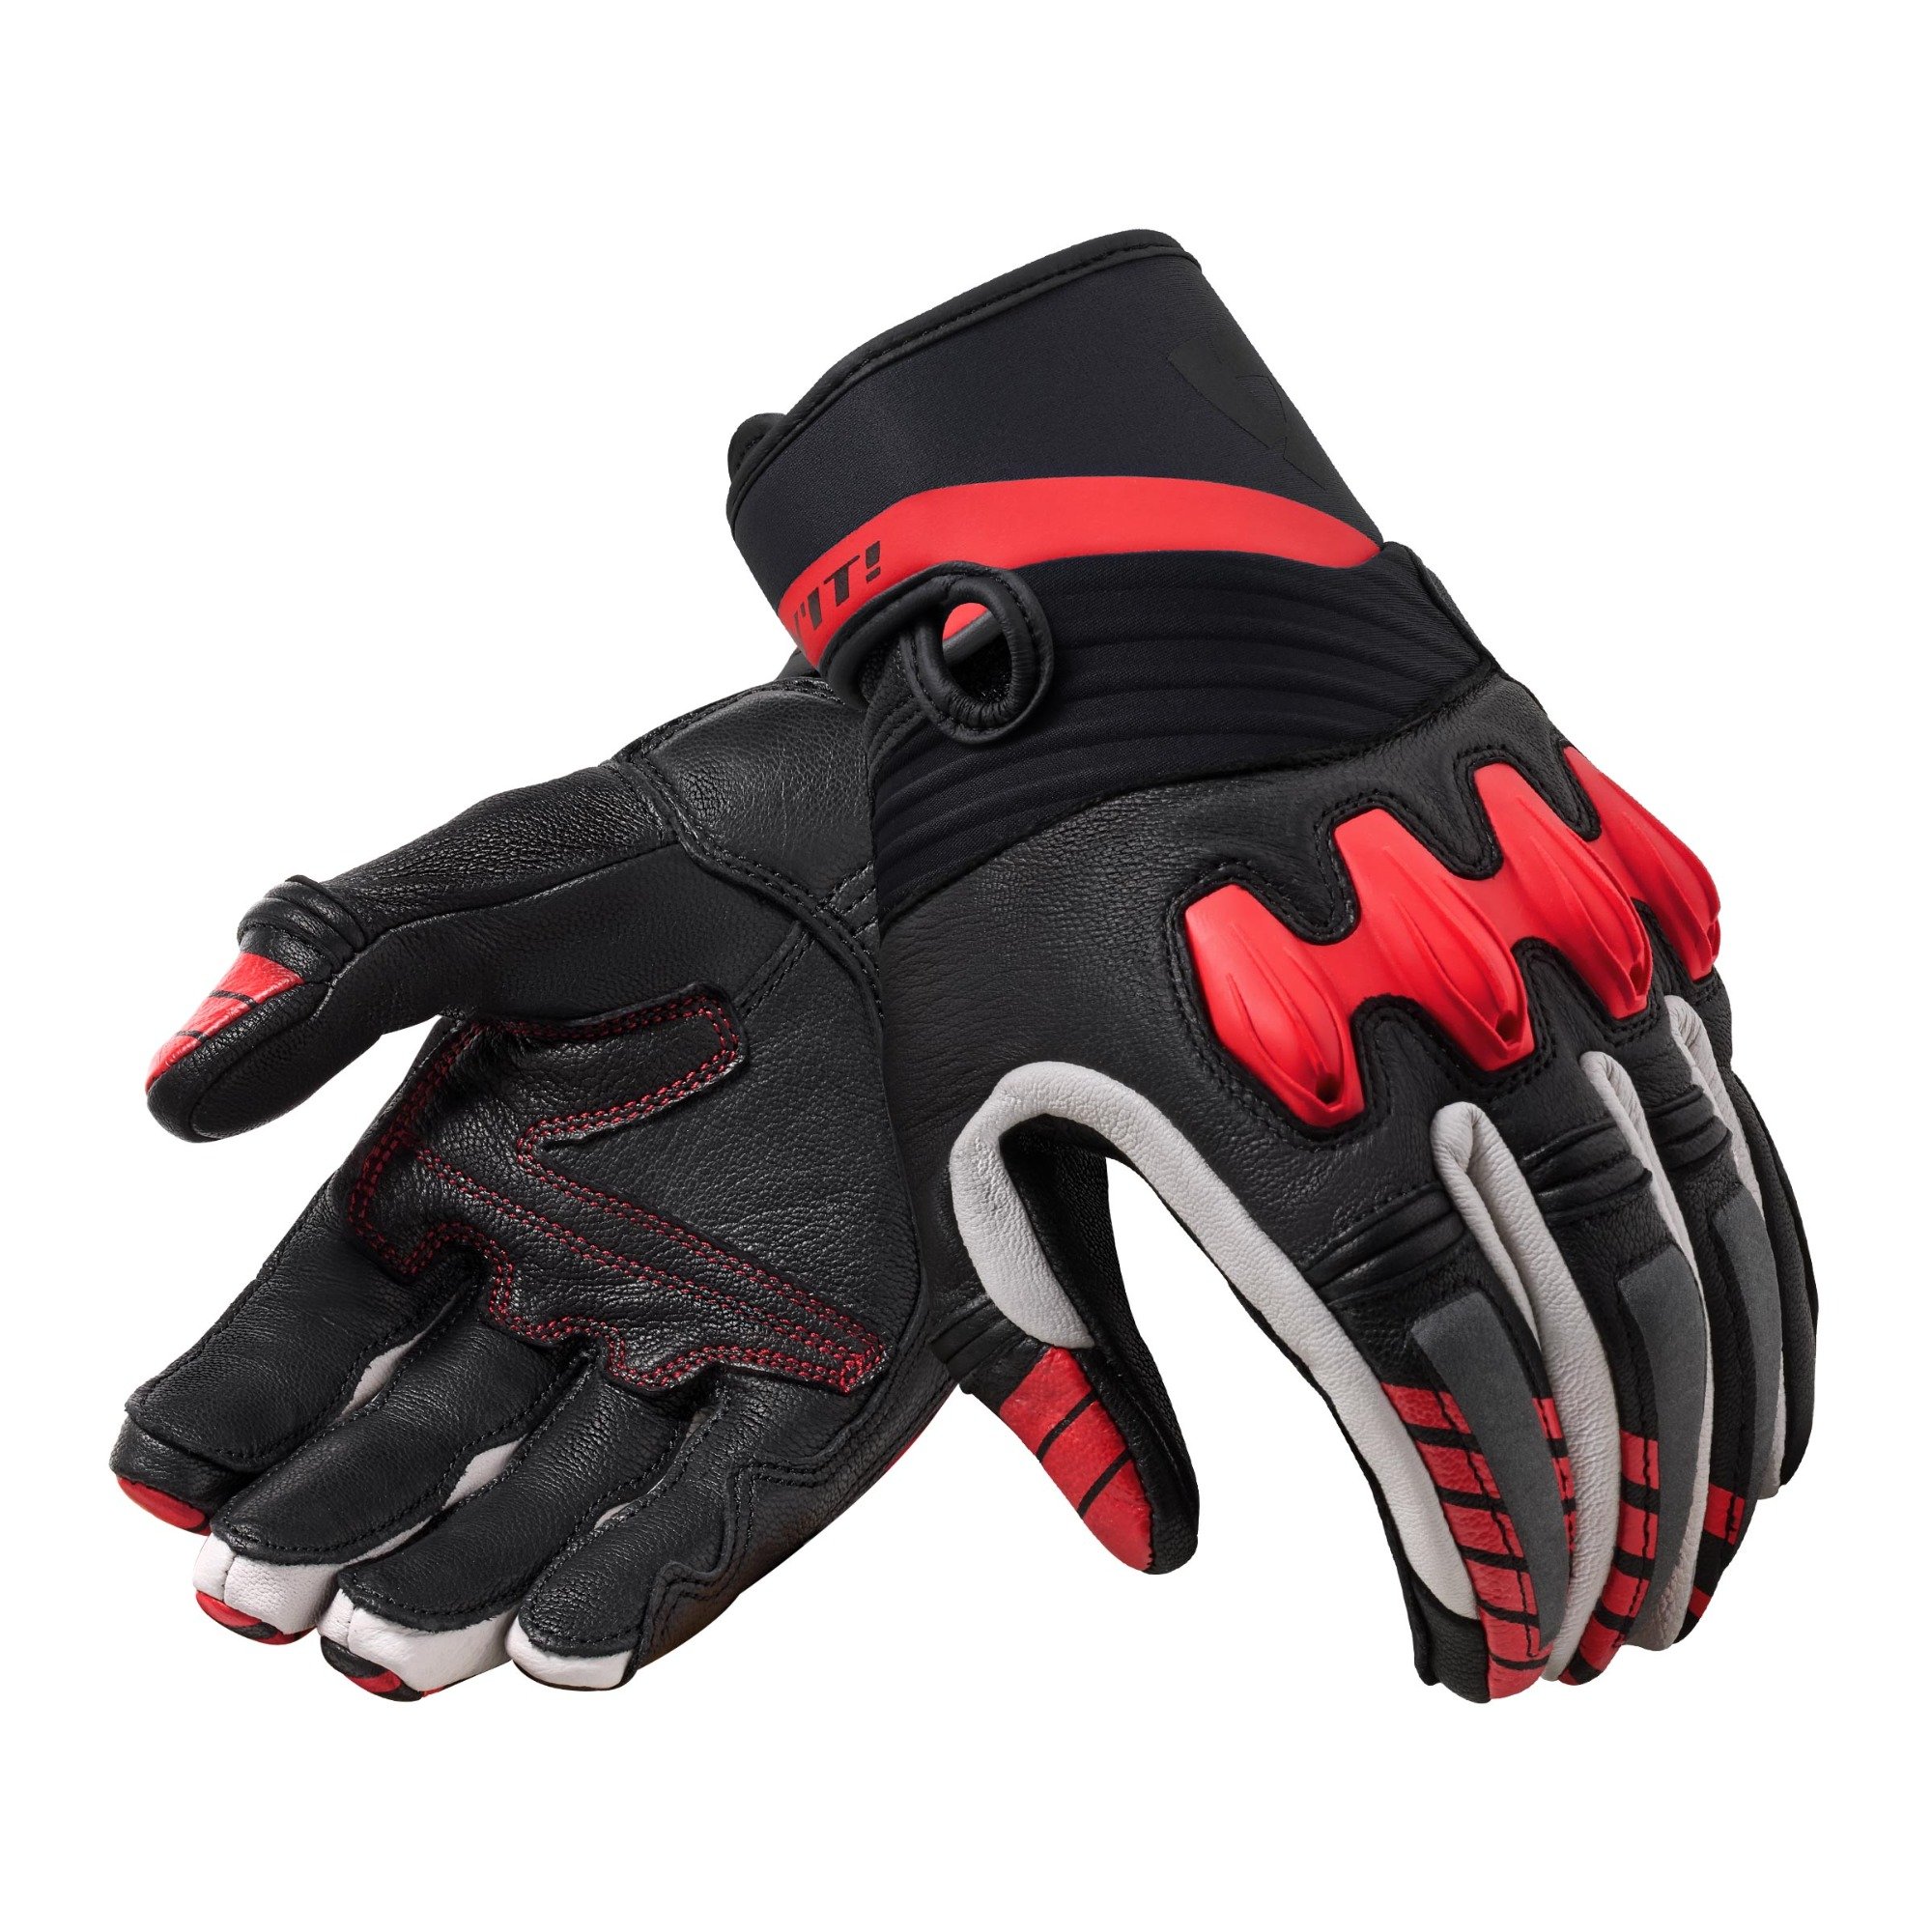 Image of REV'IT! Energy Black Neon Red Size S ID 8700001329941